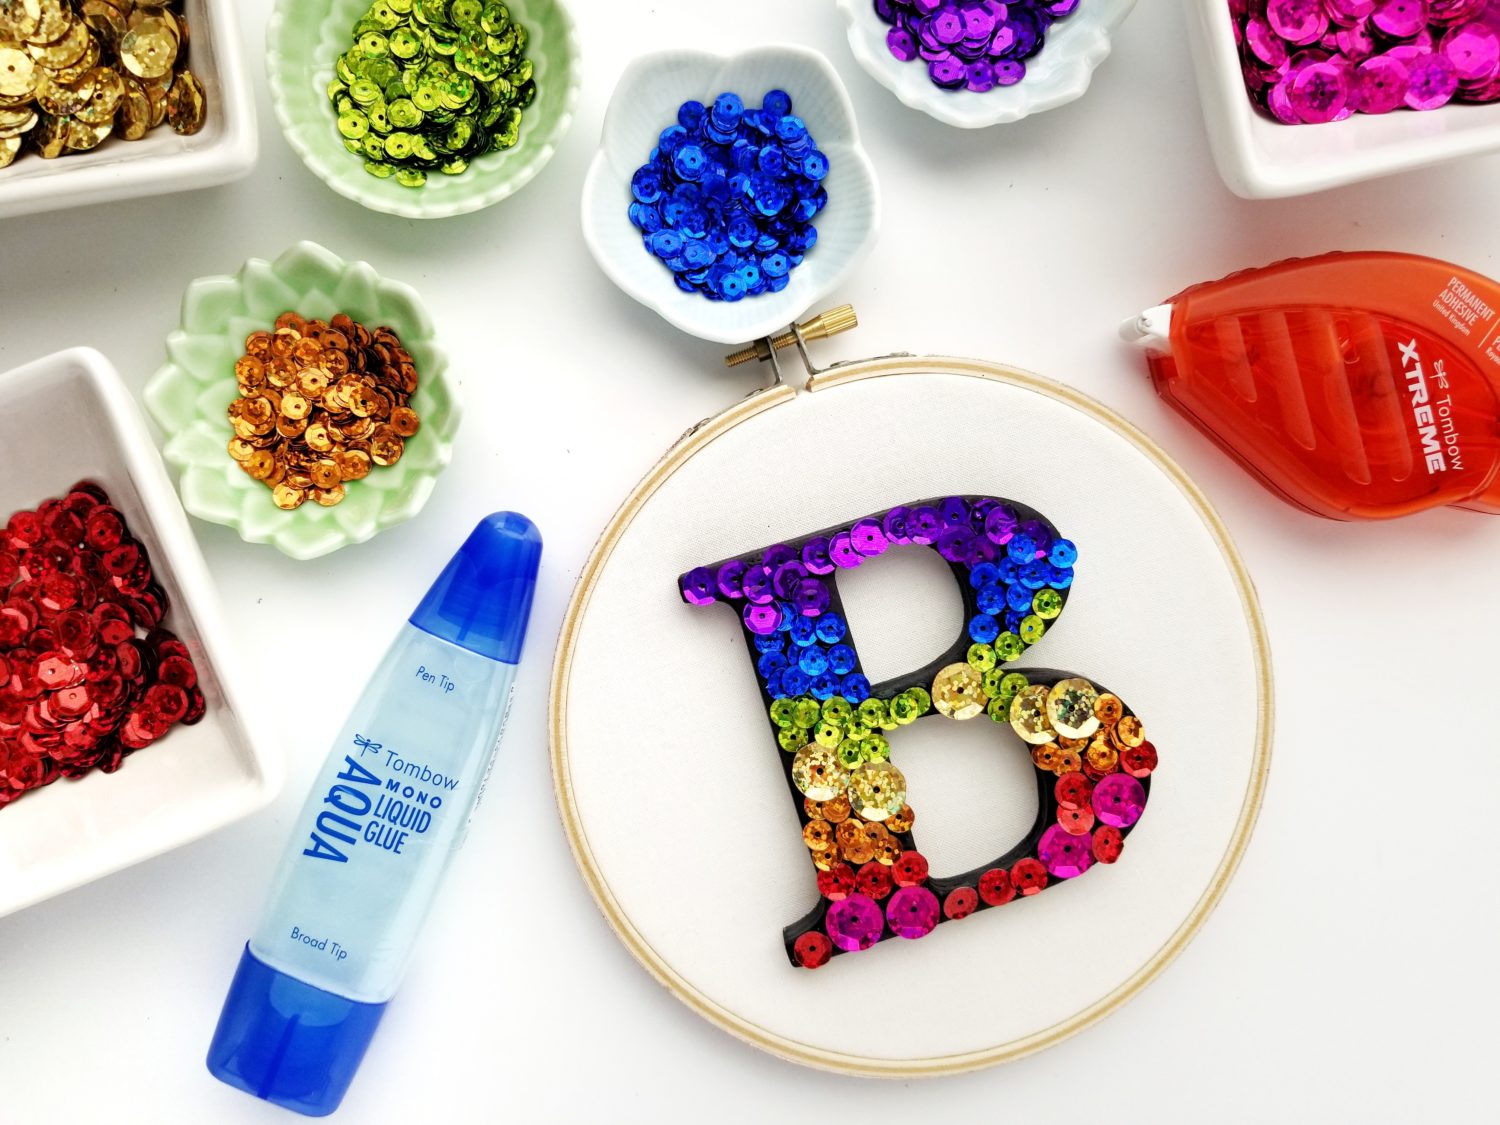 Learn to make Monogram Embroidery Hoop Art using @tombowusa adhesives with @graceannestudio!